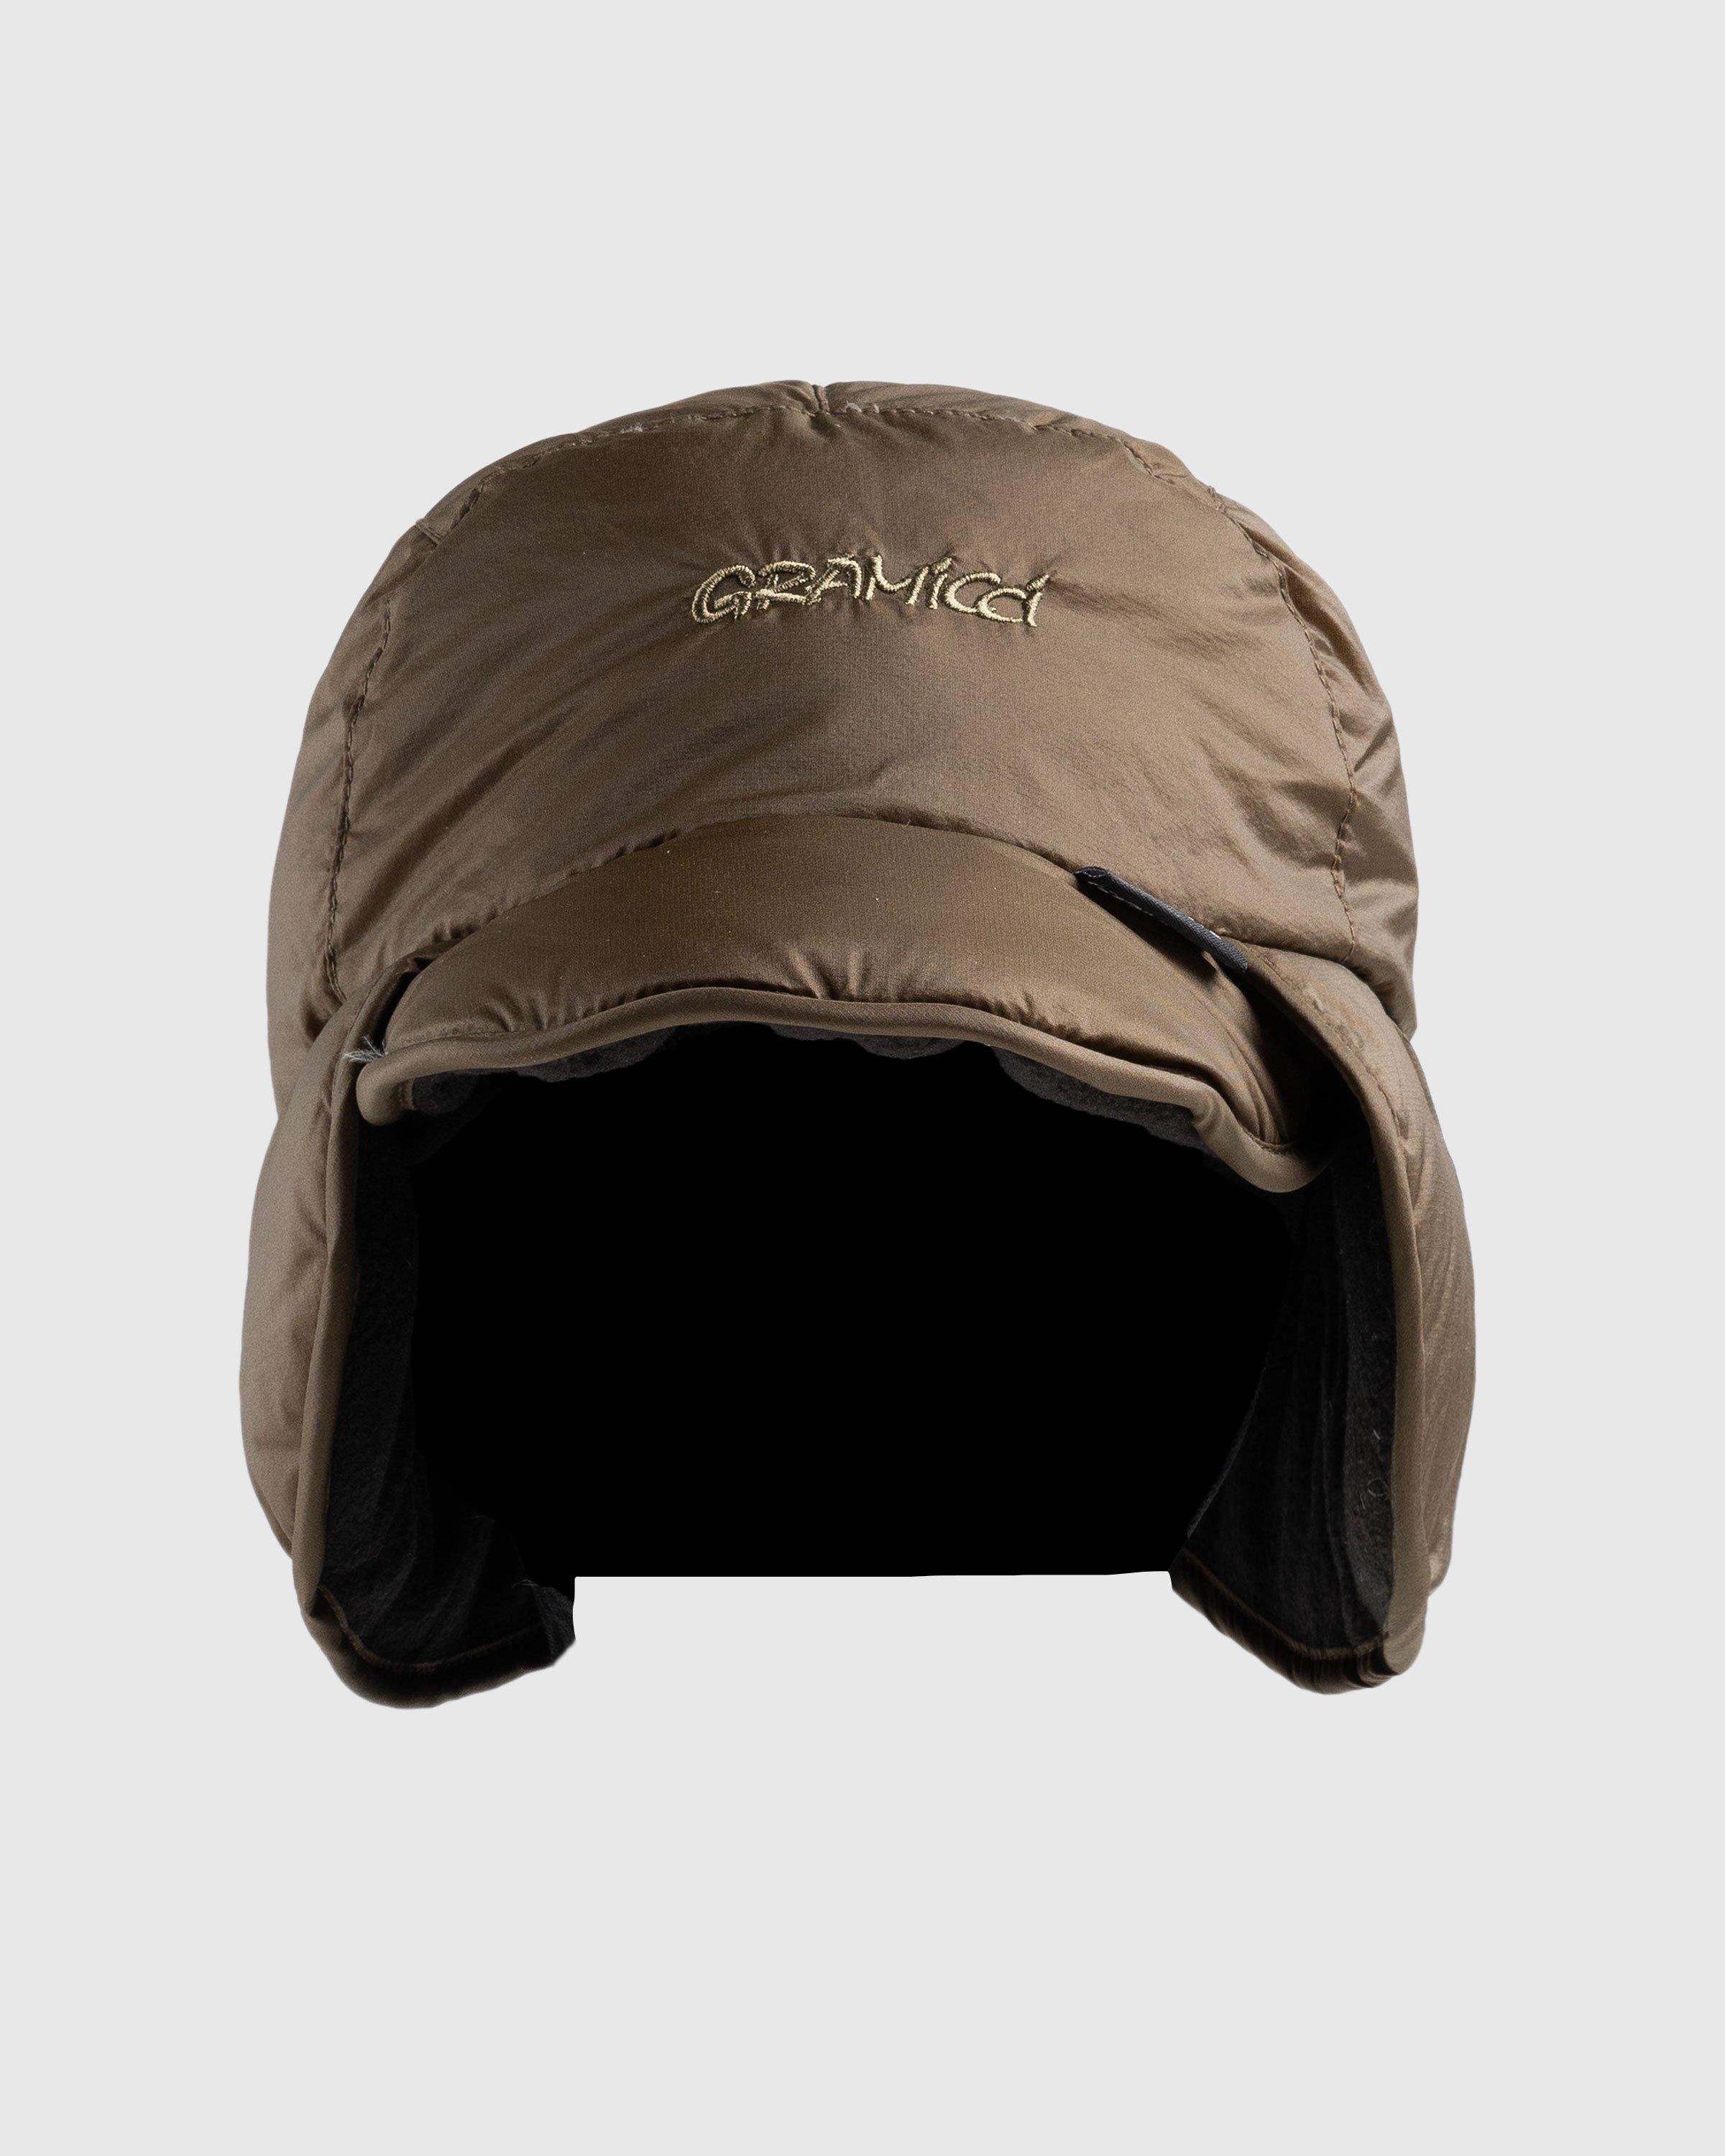 GramicciDown Mountain Cap Deep Olive by HIGHSNOBIETY